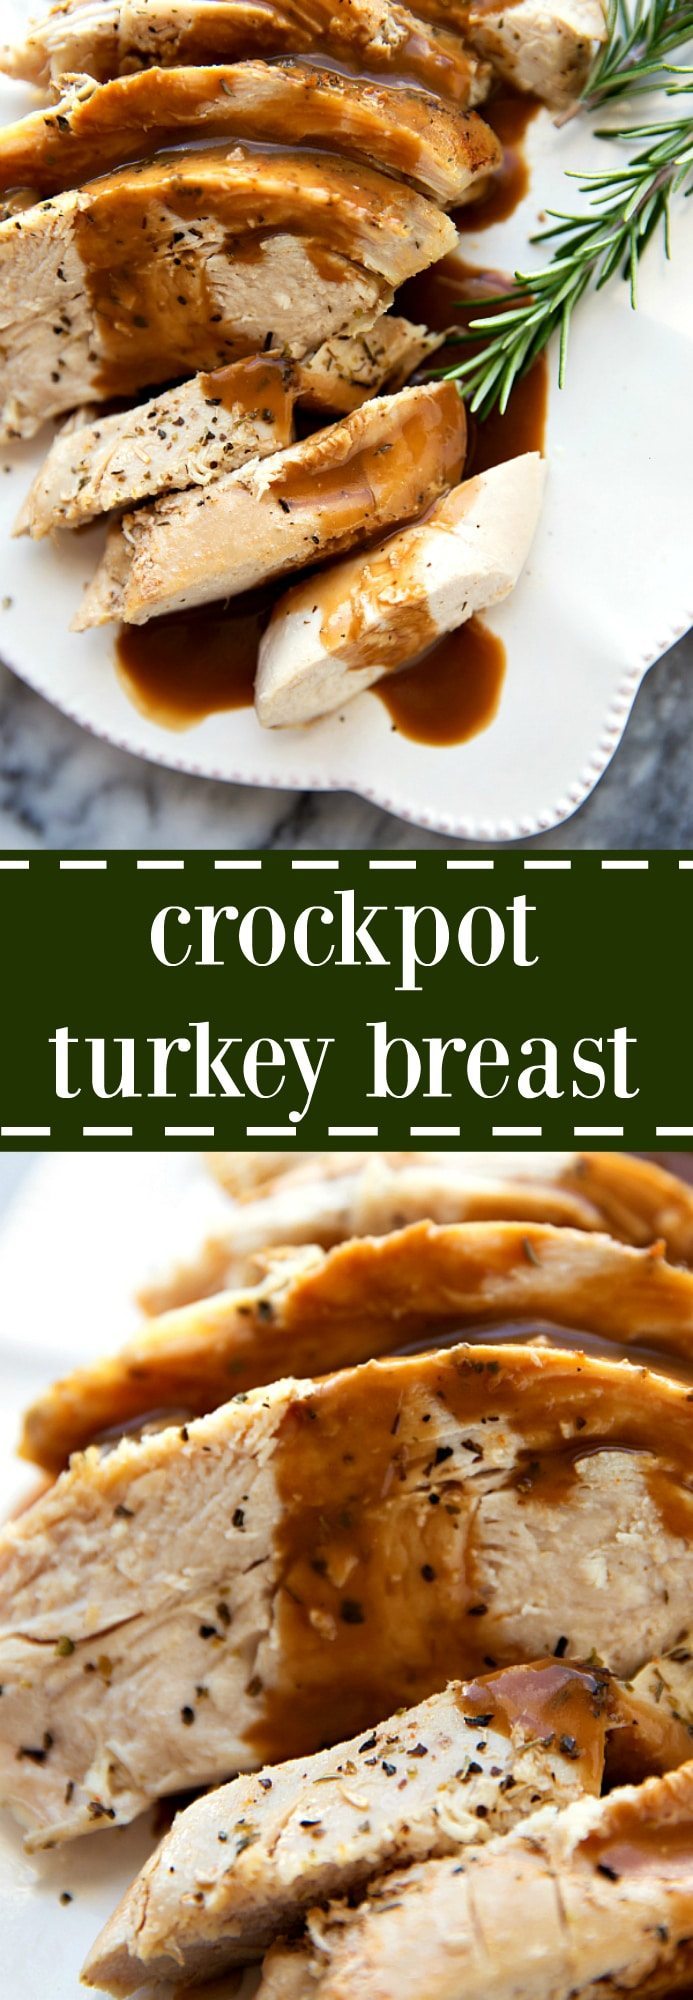 The most tender and deliciously seasoned crockpot turkey breast. Perfect for smaller get togethers or to have turkey ready for lunches and salads. Recipe via chelseasmessyapron.com